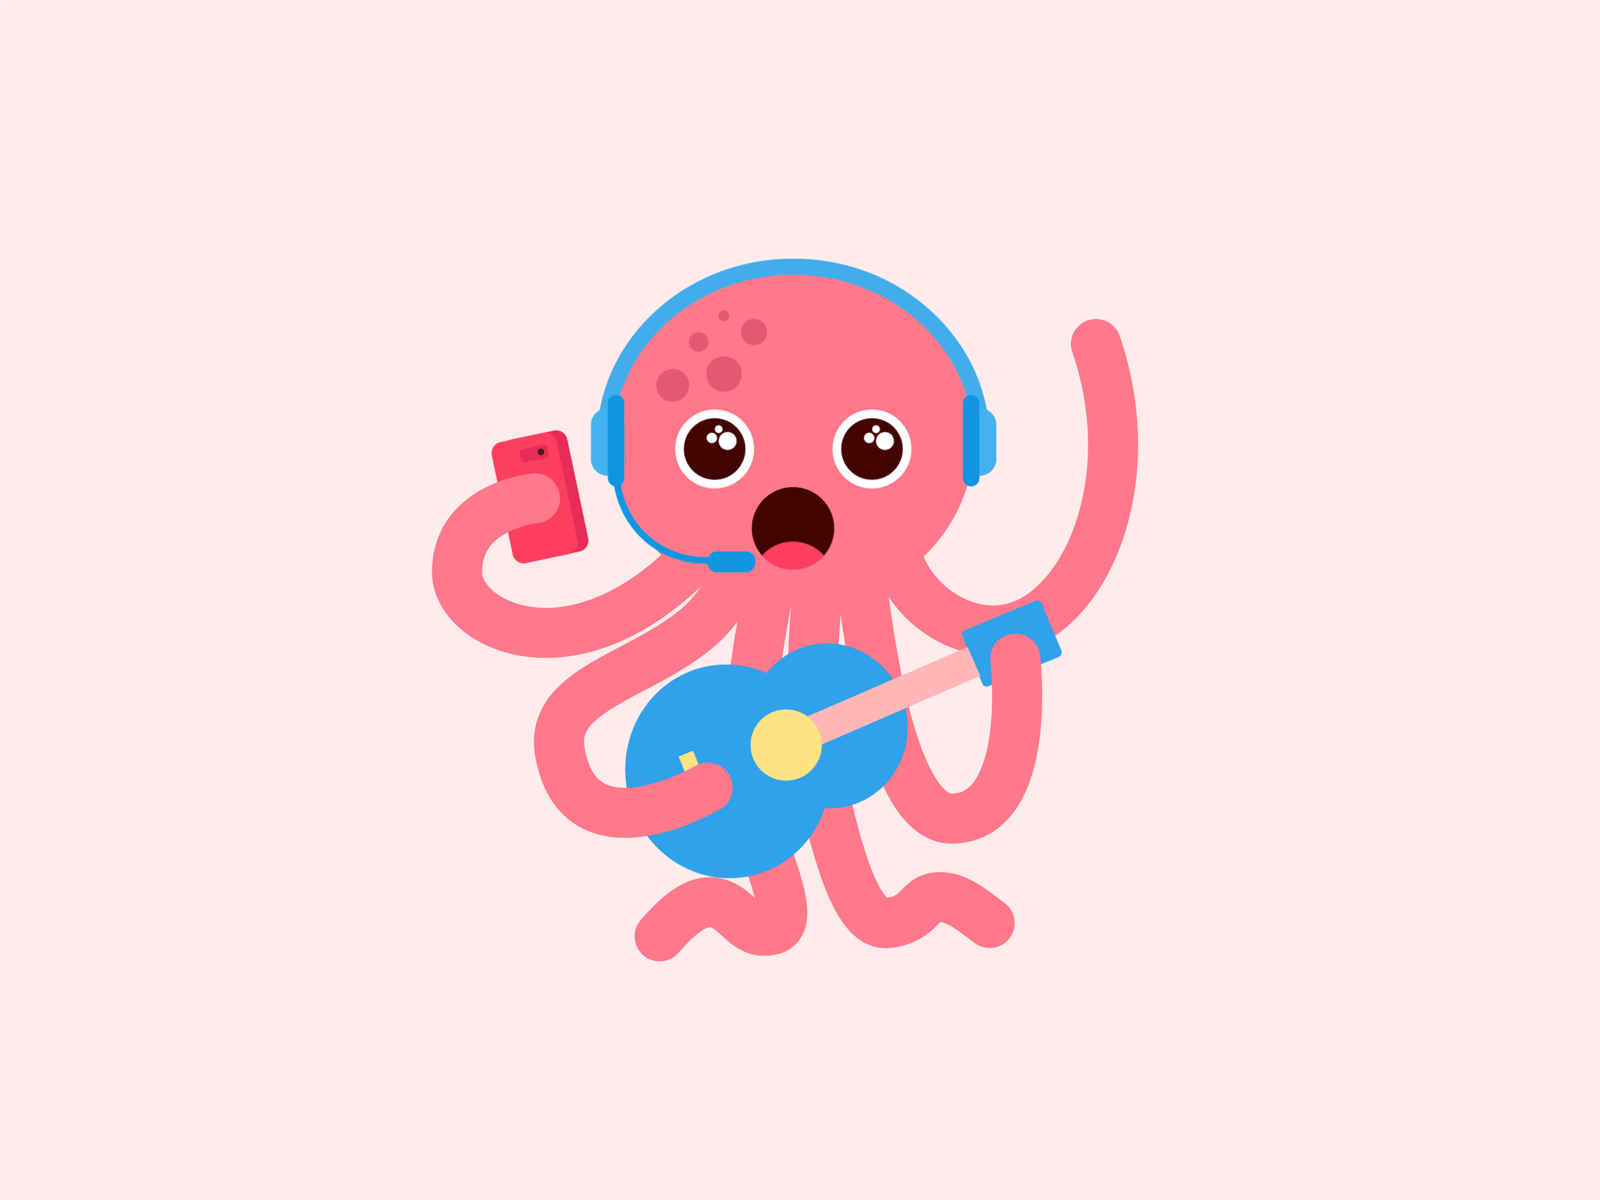 The stupid octopus is playing guitar